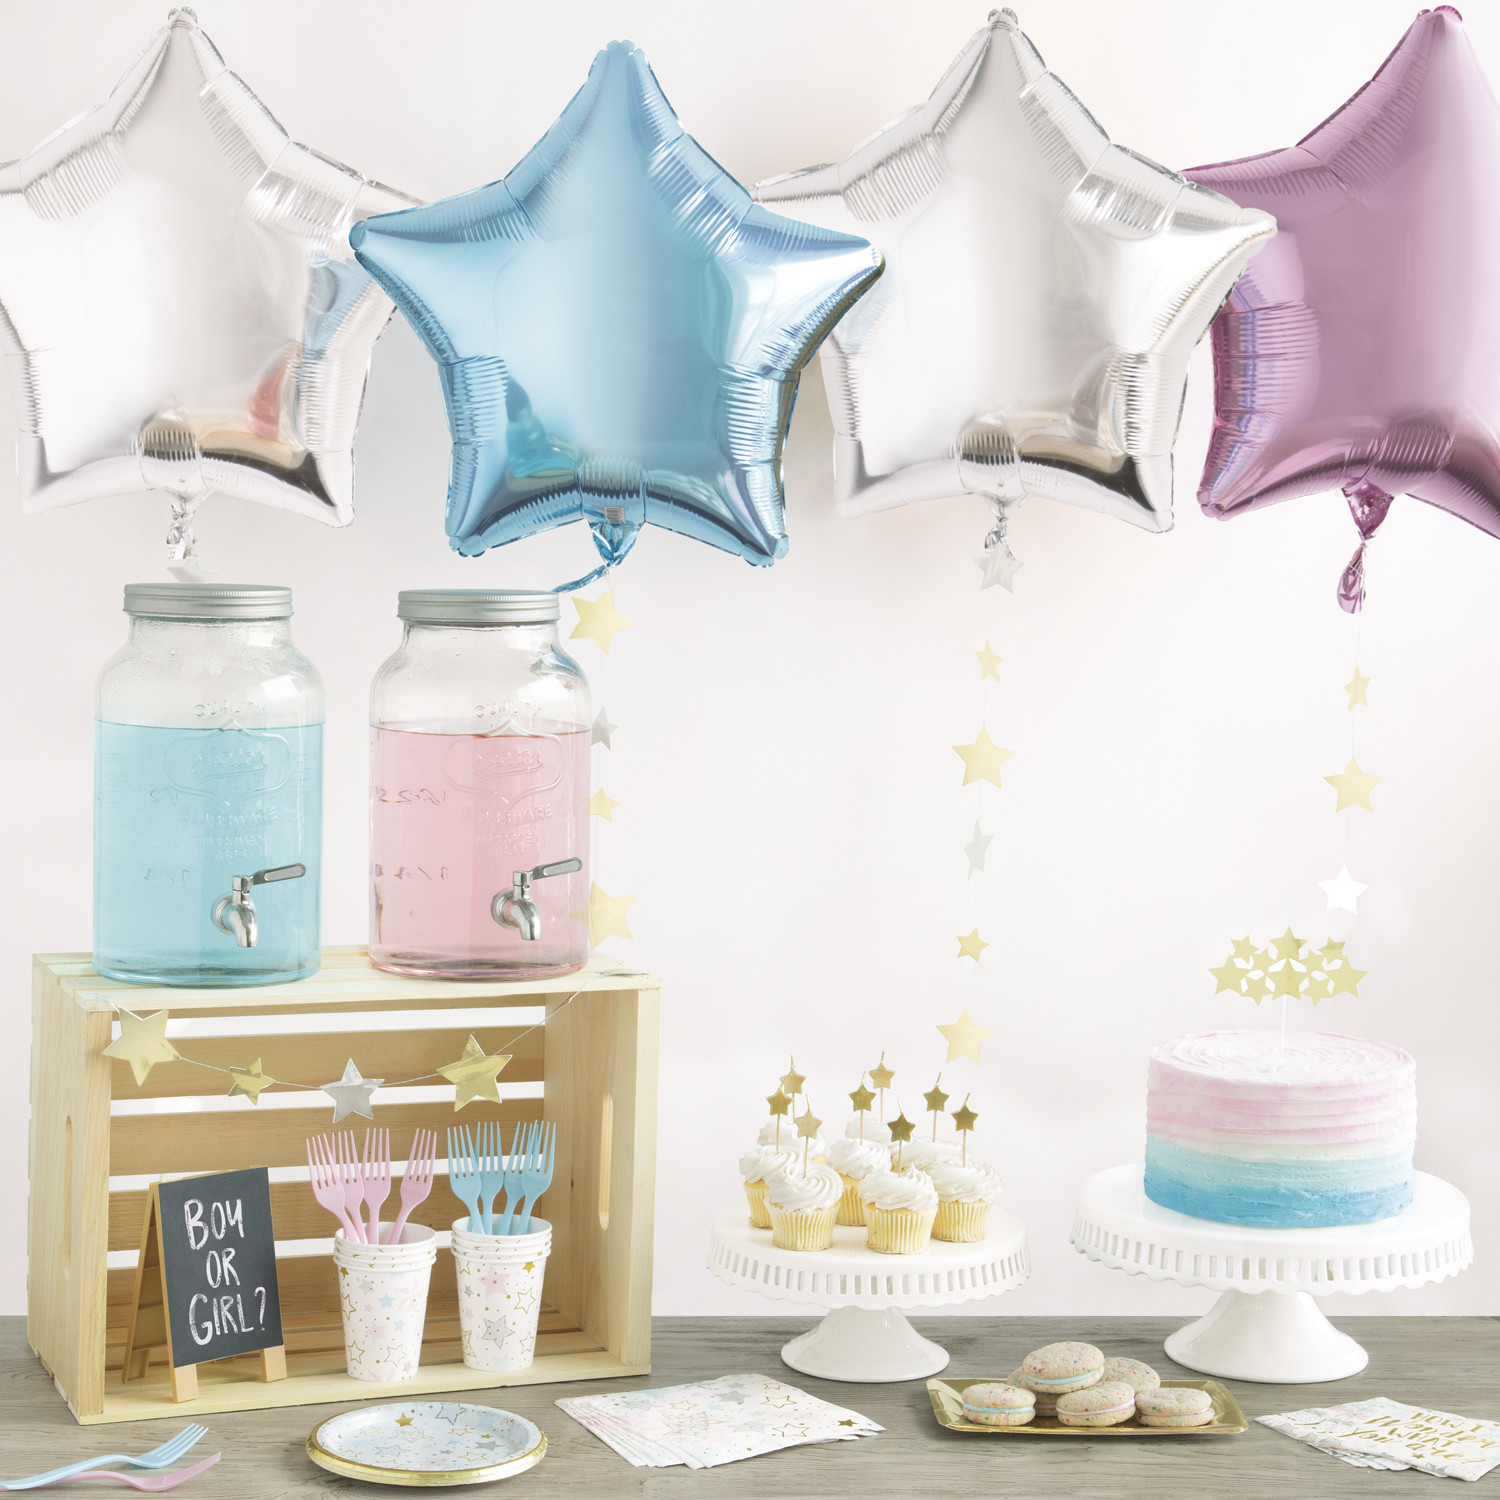 Gender Revealing Party Ideas
 Gender Reveal Party Ideas